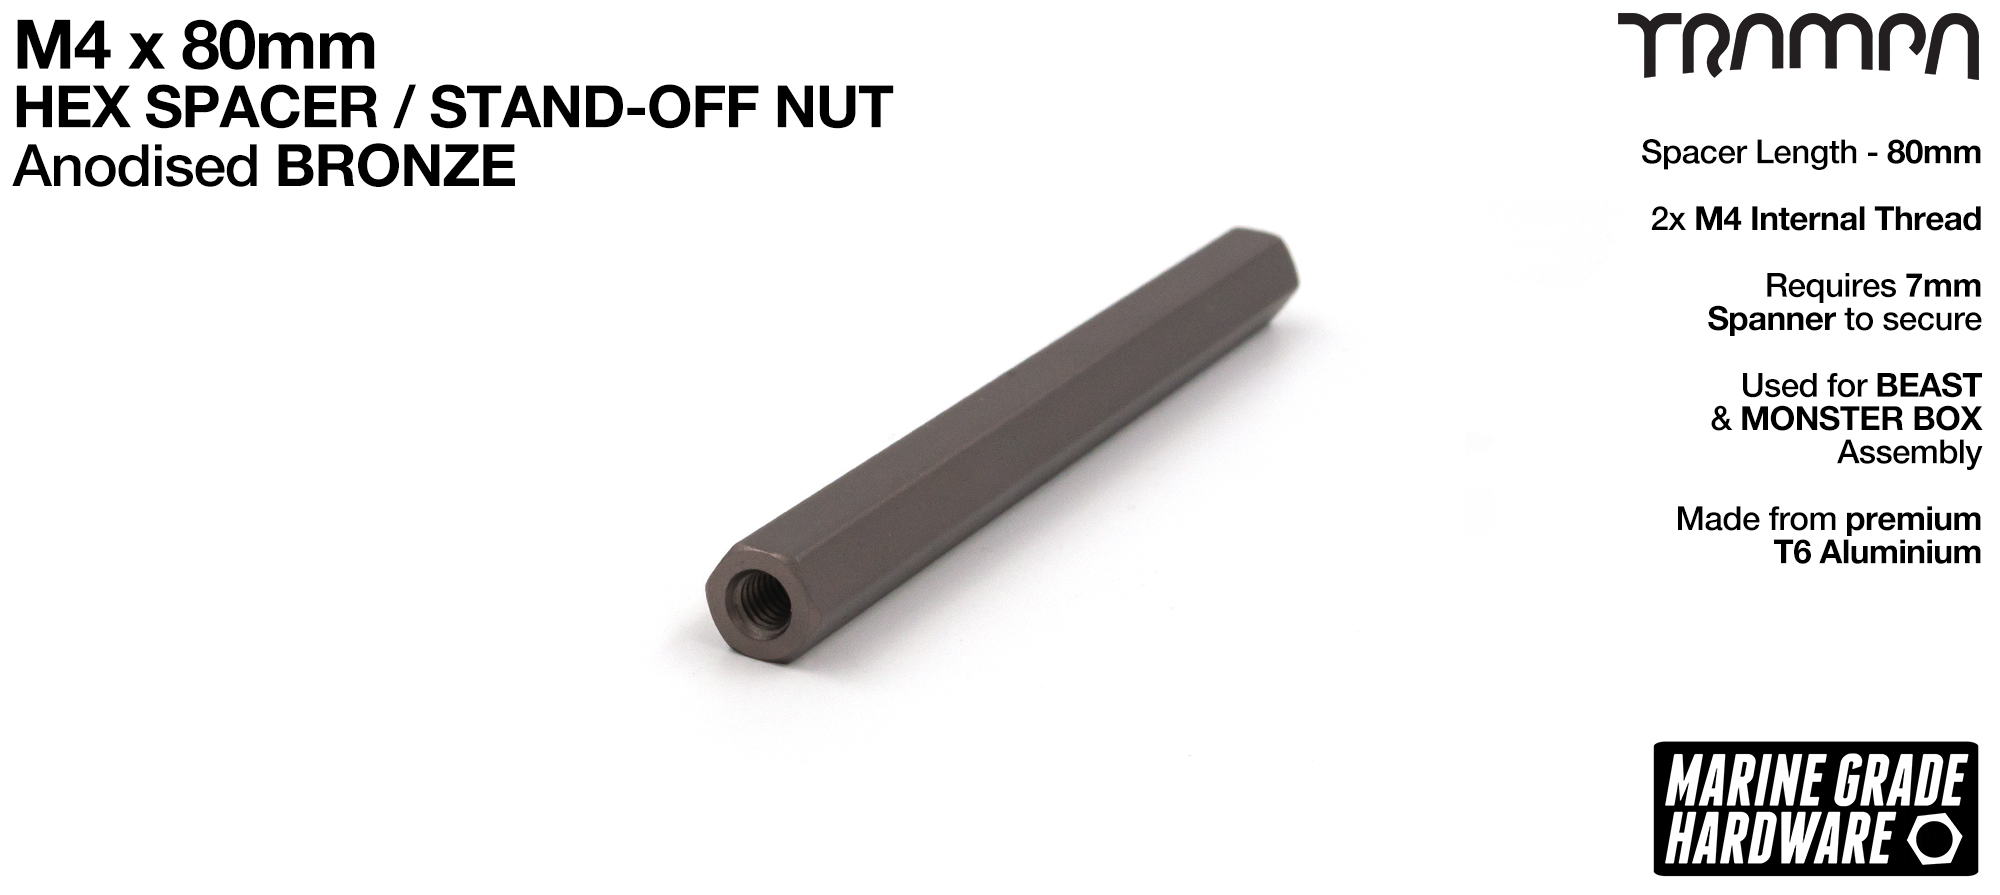 M4 x 80mm Aluminium Threaded Spacer Nut Used for assembling the BEAST Battery Boxes - BRONZE